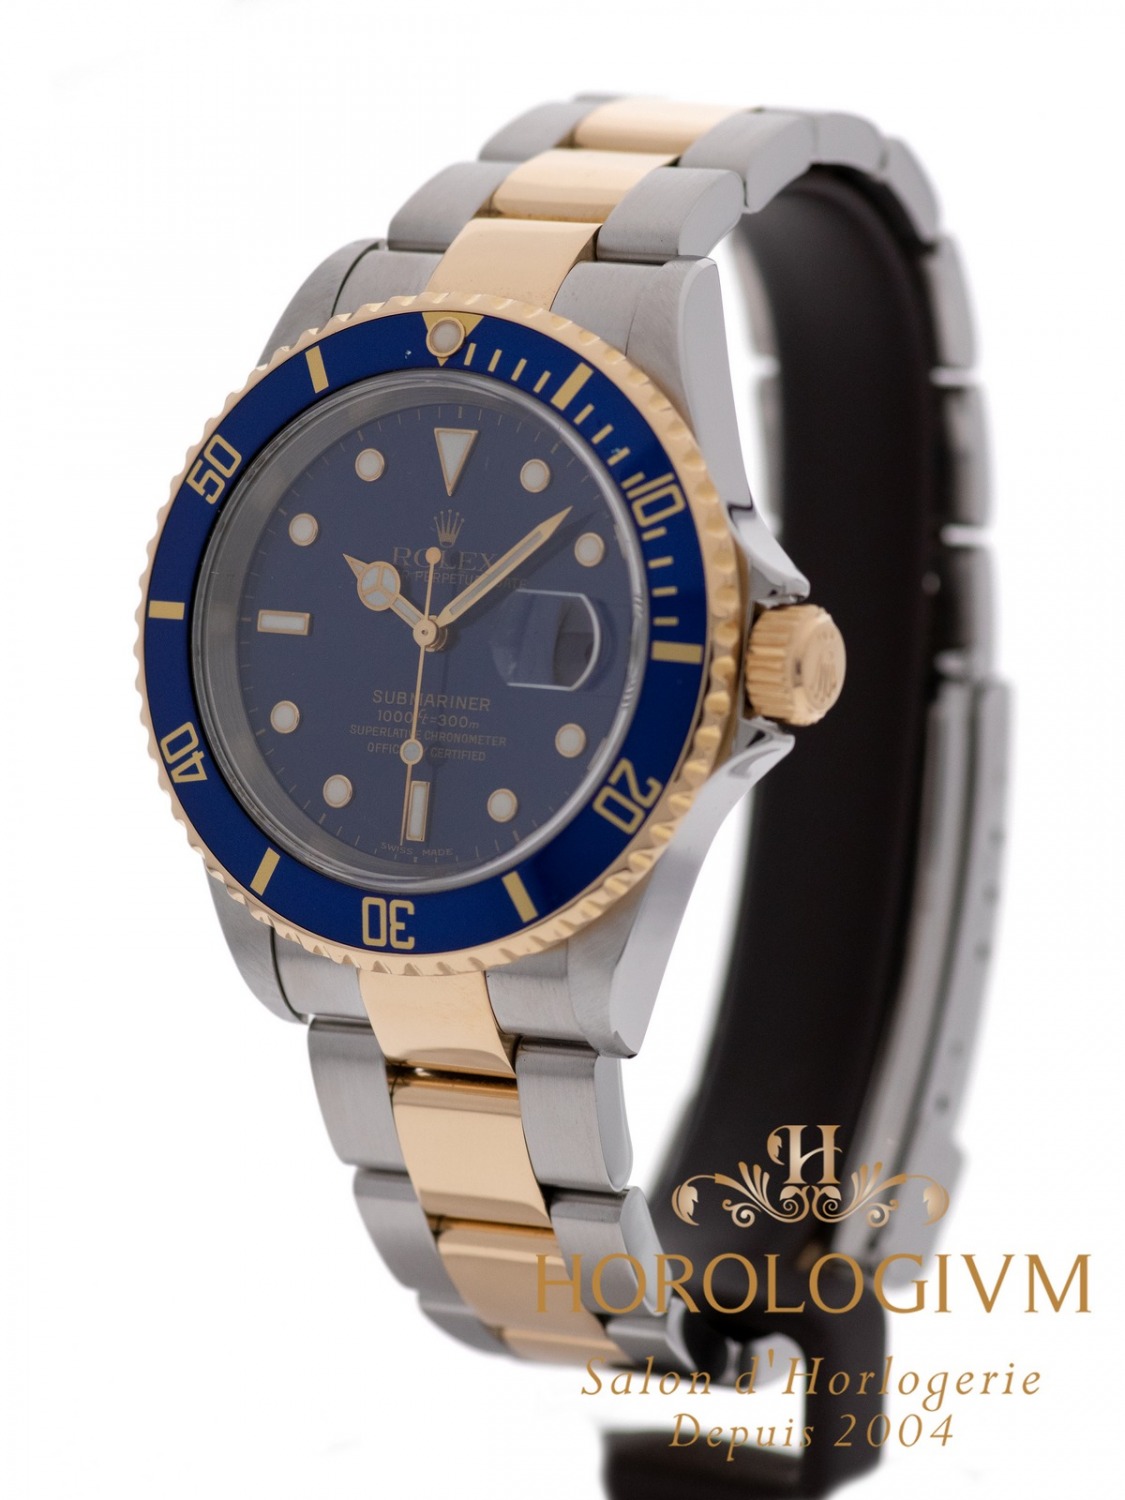 Rolex Submariner Two-Tone Ref. 16613 watch, two-tone (bi-colored) silver + yellow gold (case) and yellow gold + blue (bezel)